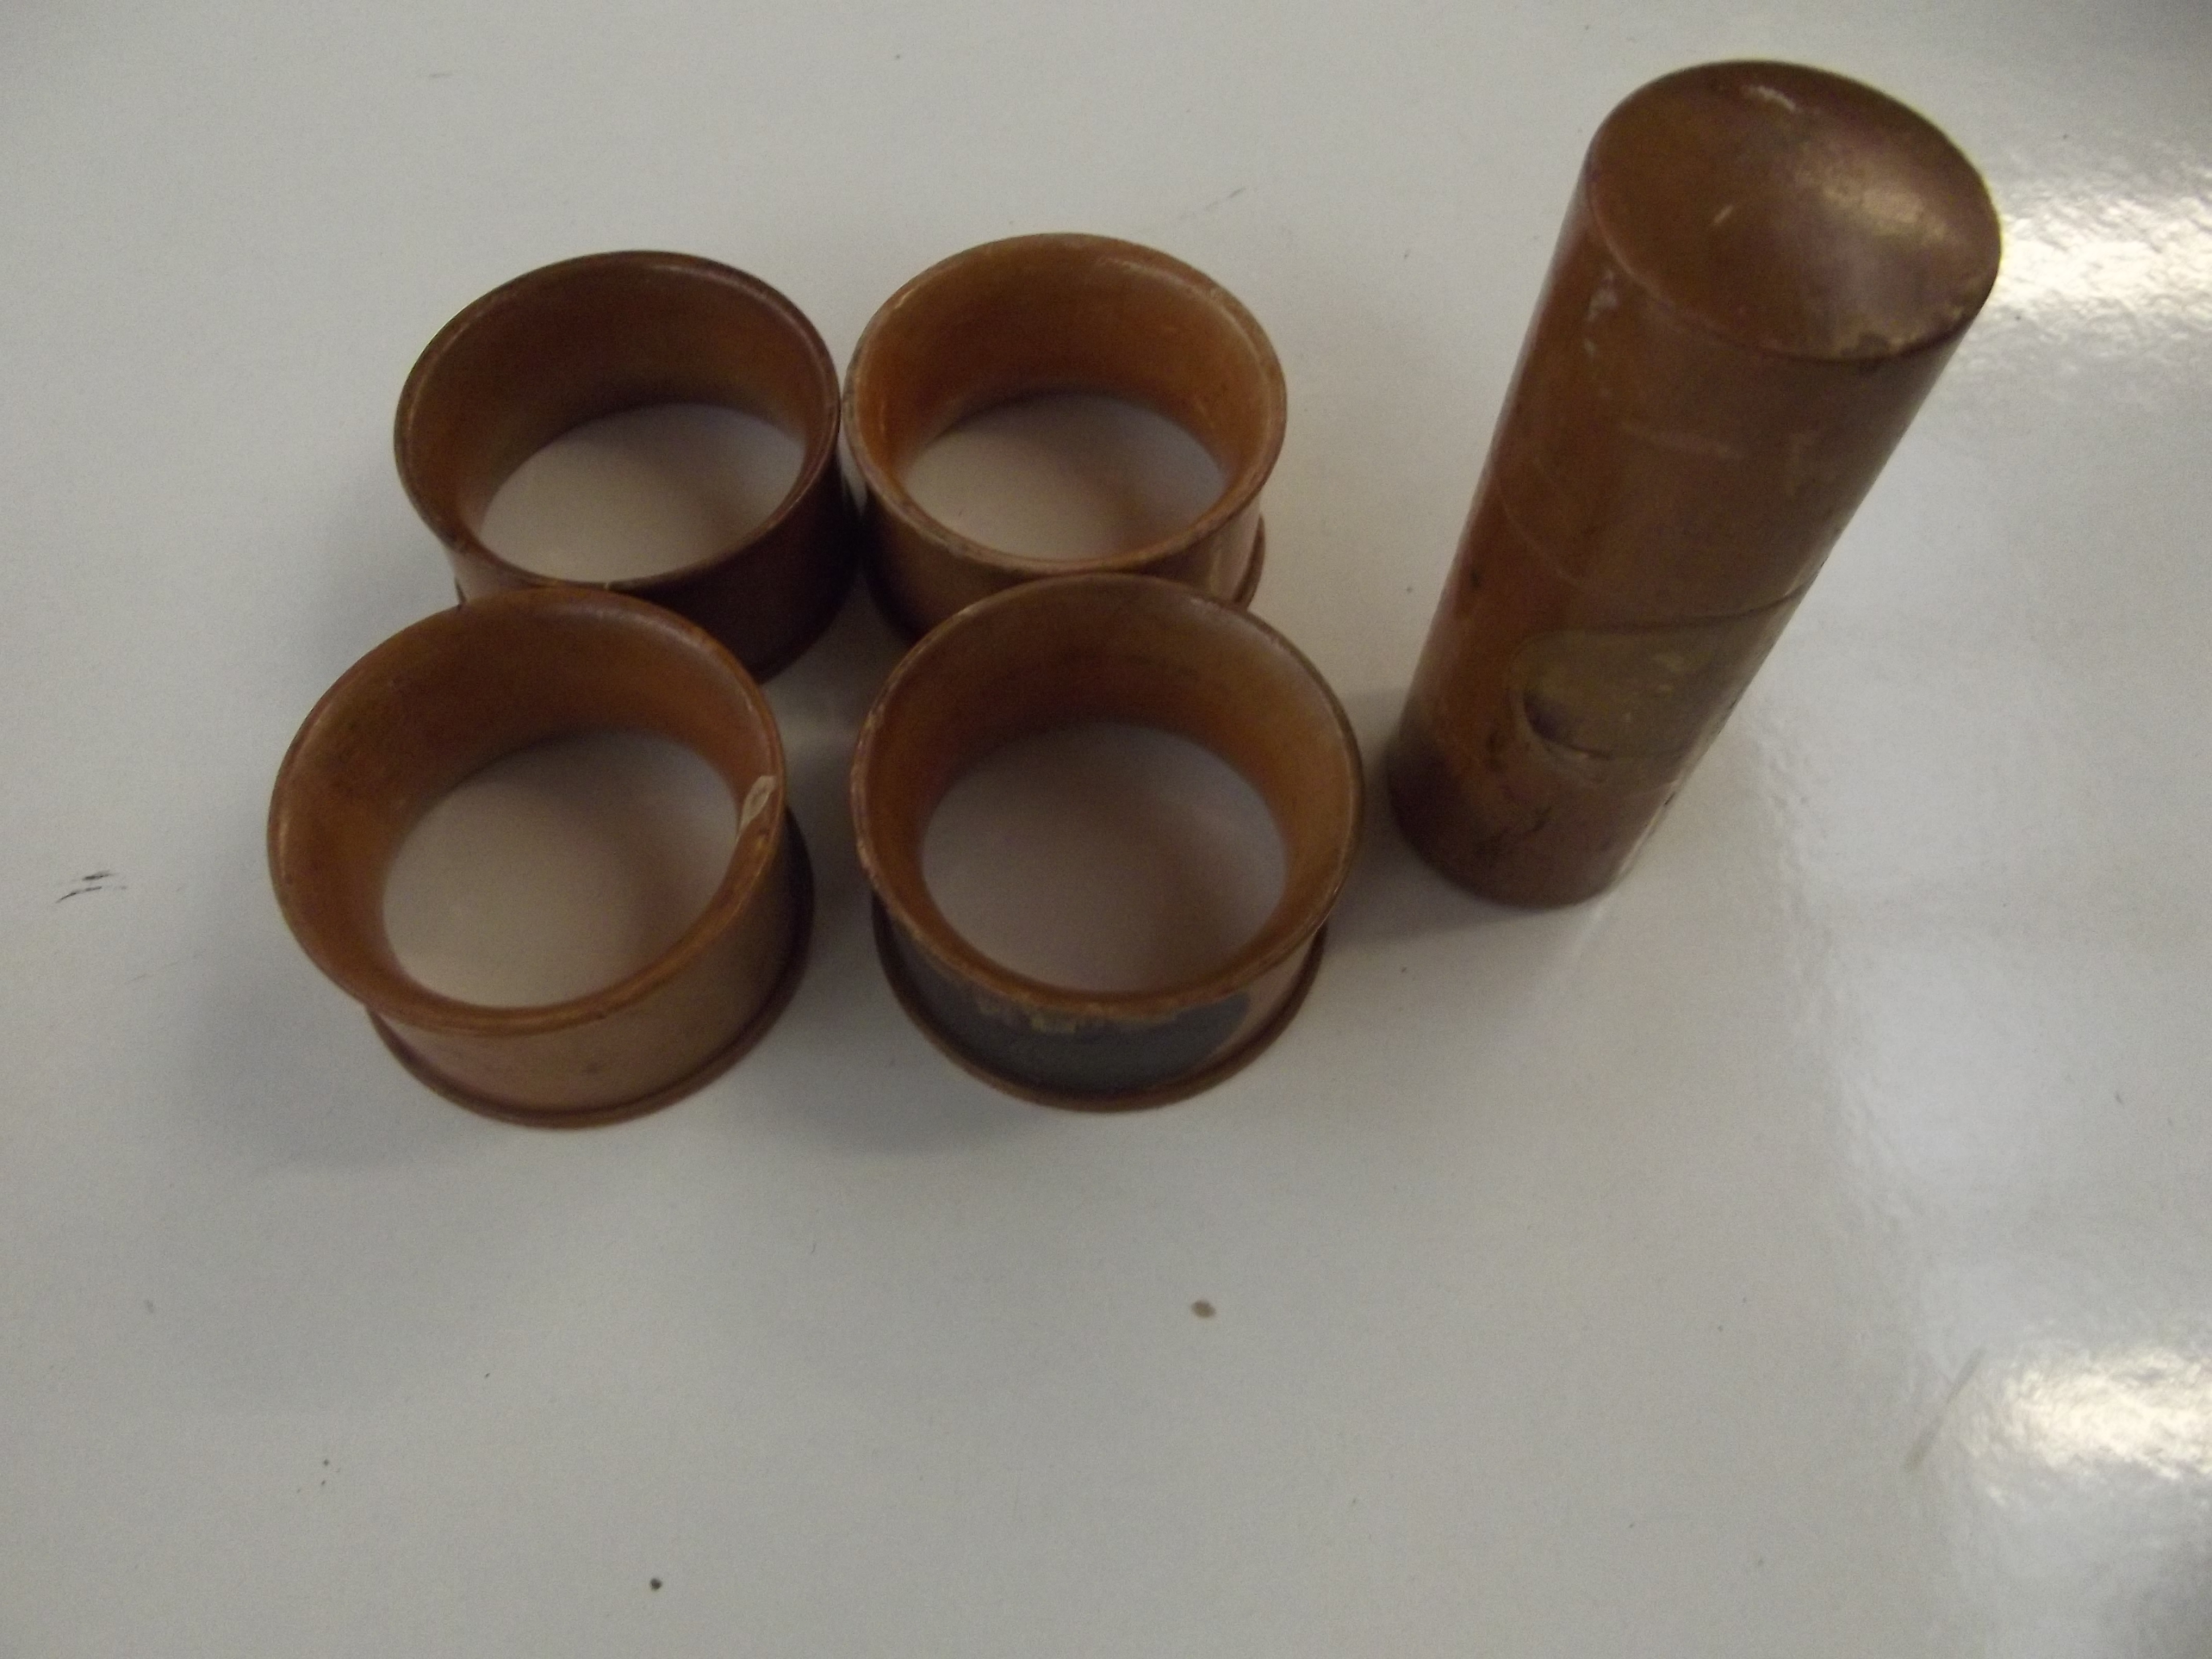 Mauchline ware napkin rings and needle case